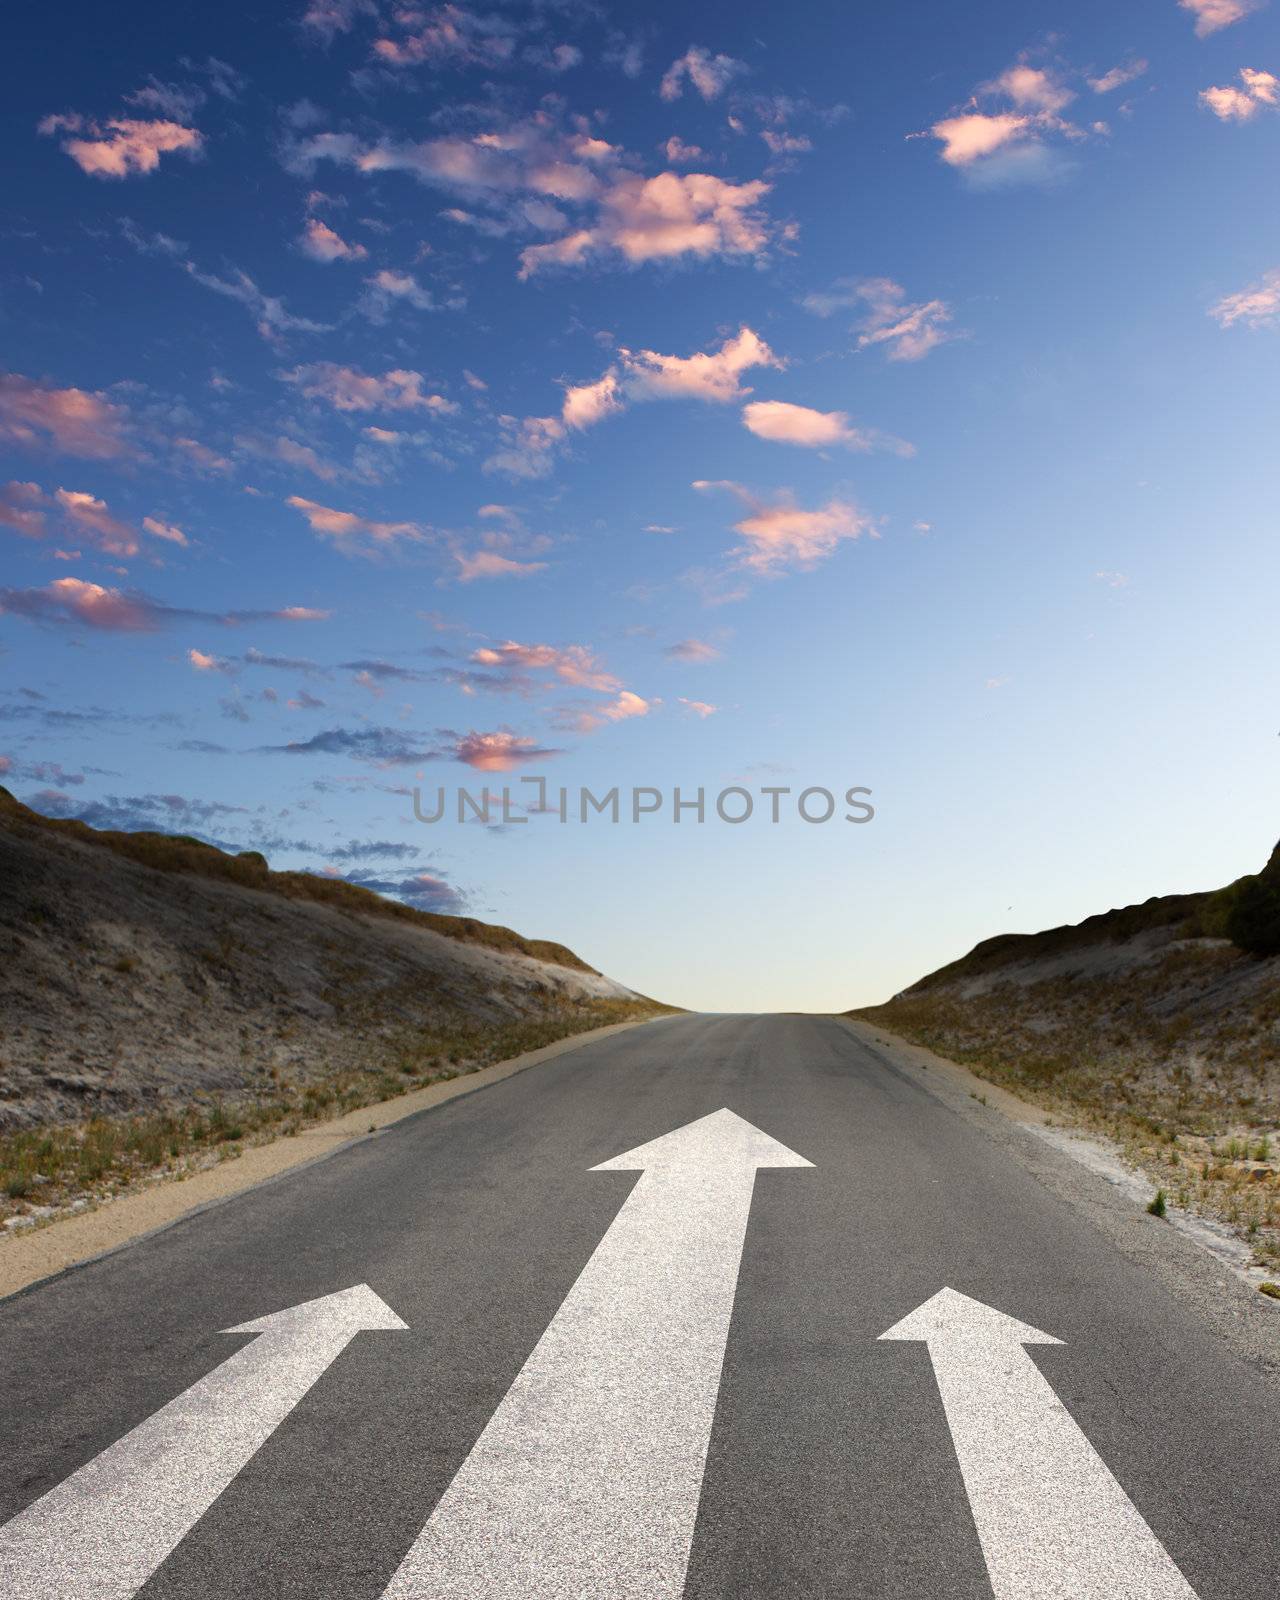 Image of road with white arrow directing forward